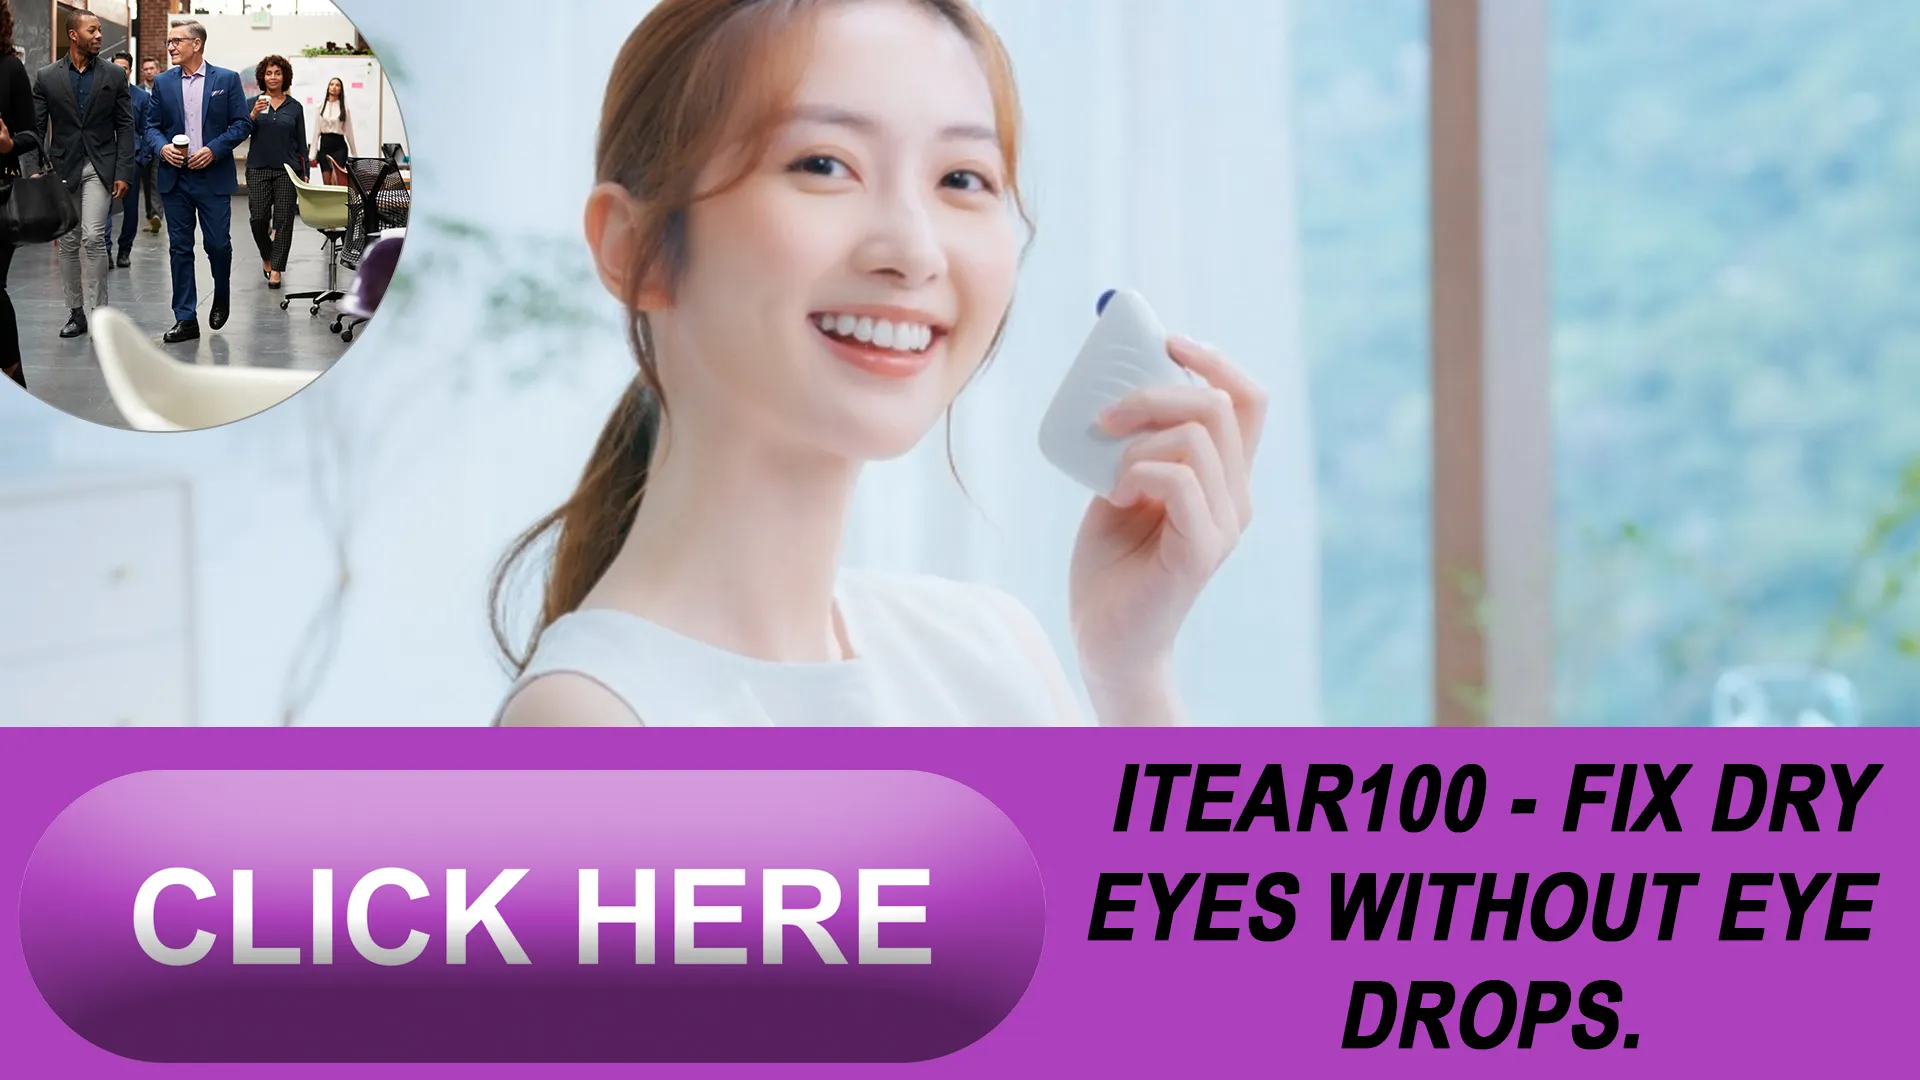 The Science Behind iTEAR100: Activation of Tear Production